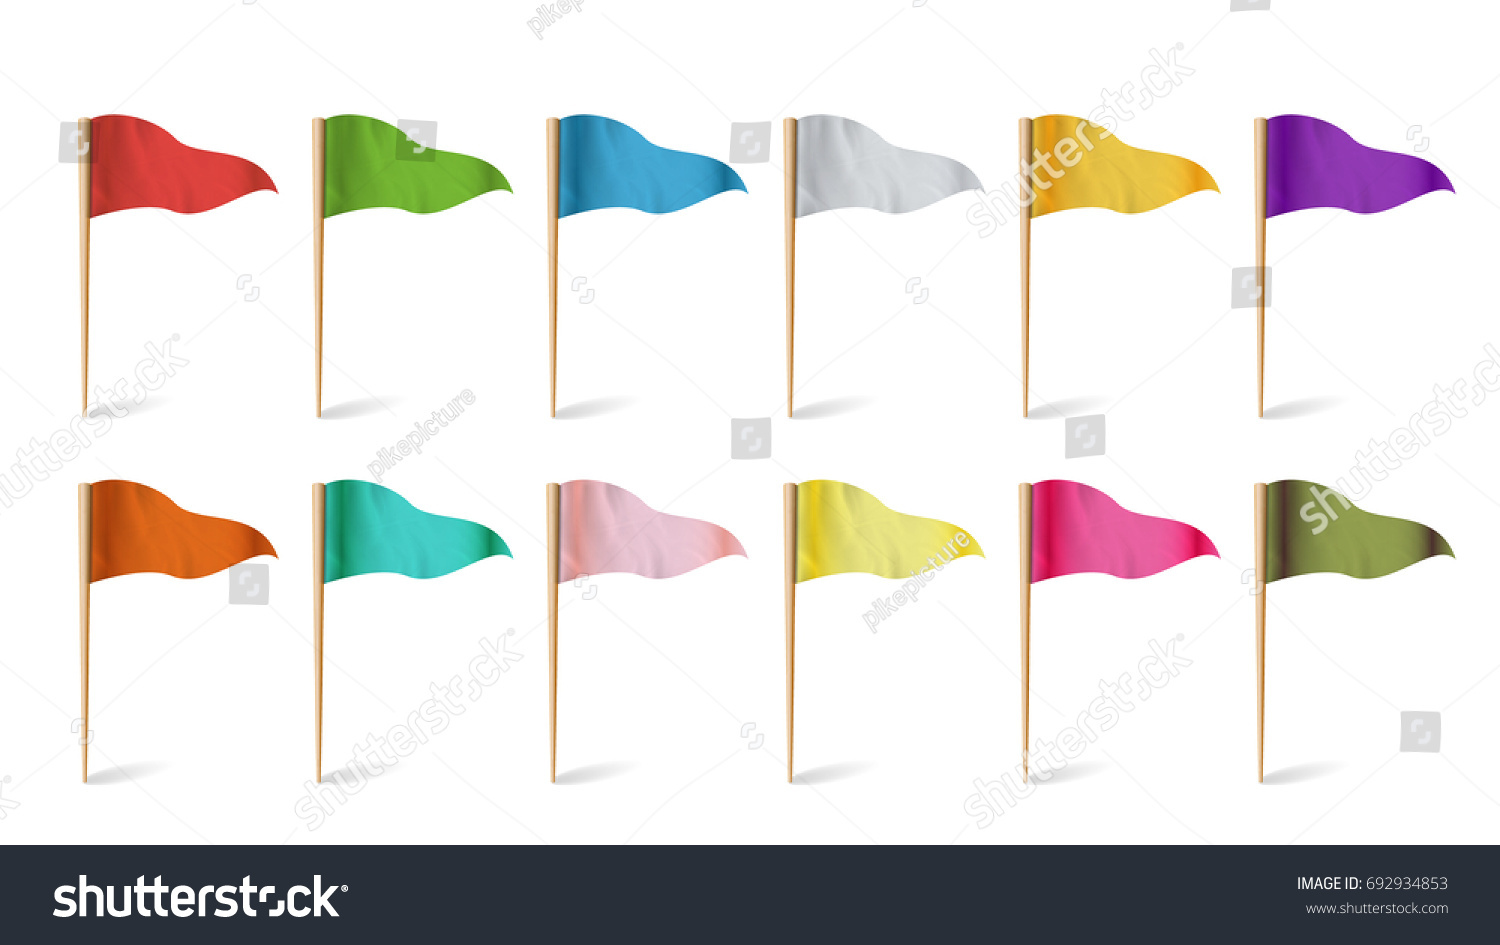 SVG of Colorful Cocktail Flags Vector. Set Multi Colored Pins Illustration. 
 svg